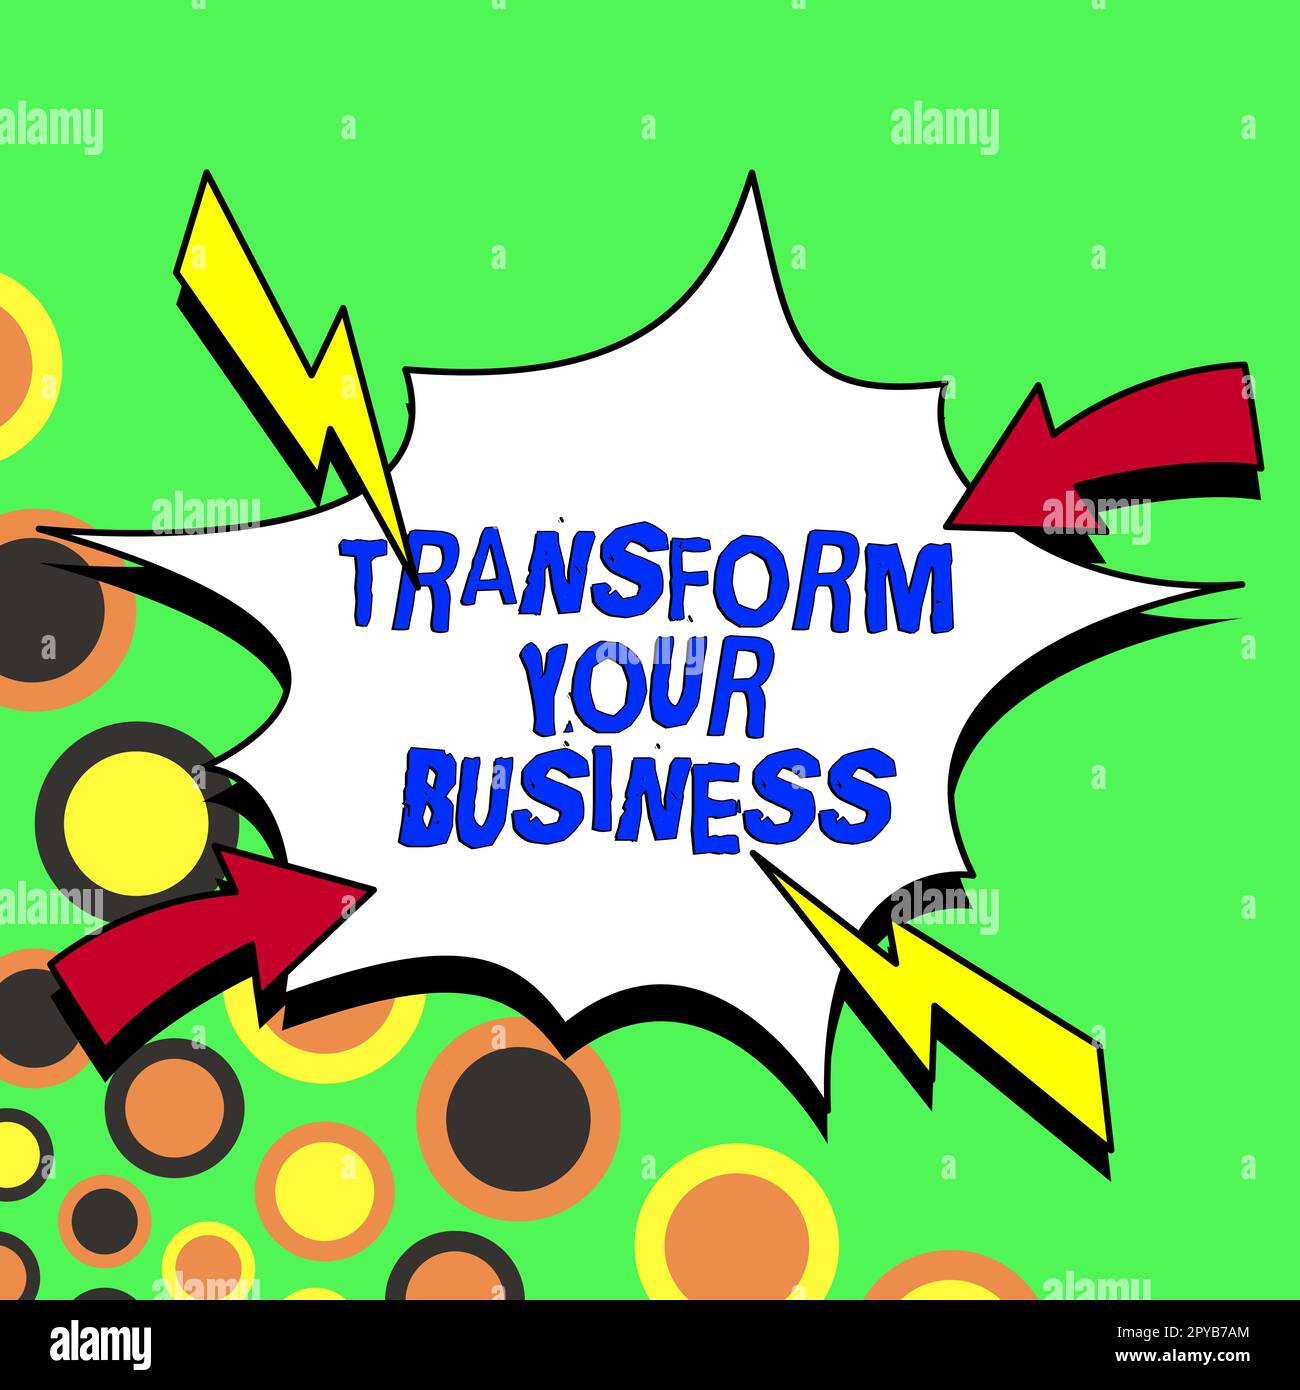 Text showing inspiration Transform Your Business. Business showcase Modify energy on innovation and sustainable growth Stock Photo